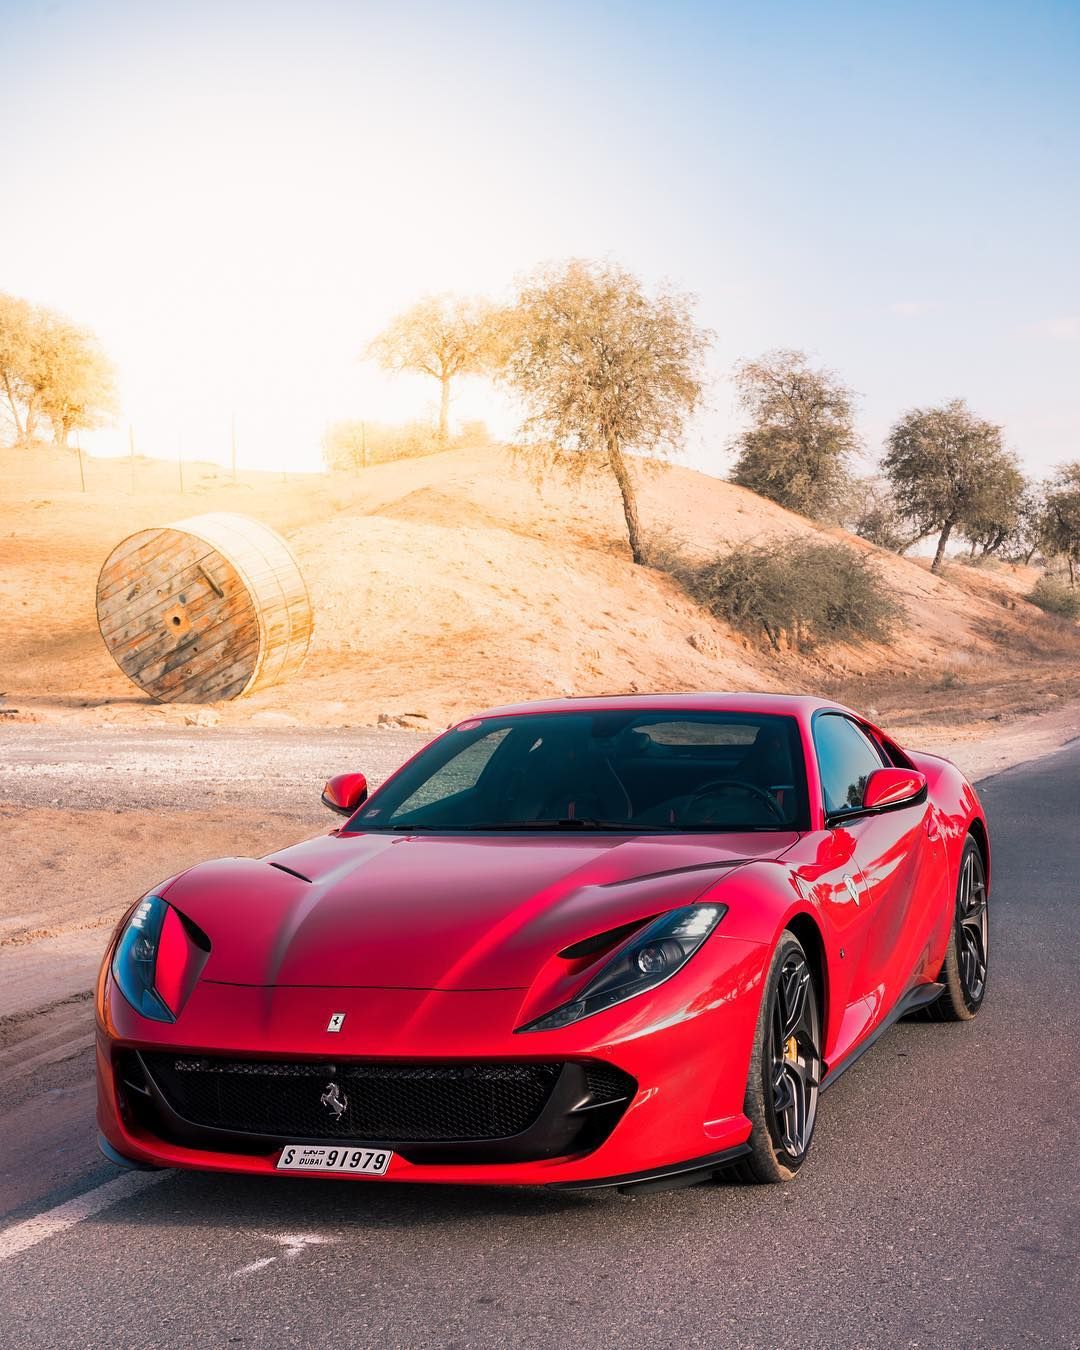 Martin Berry ???? on Instagram: “Ready to power through the week ahead ?? #812superfast”